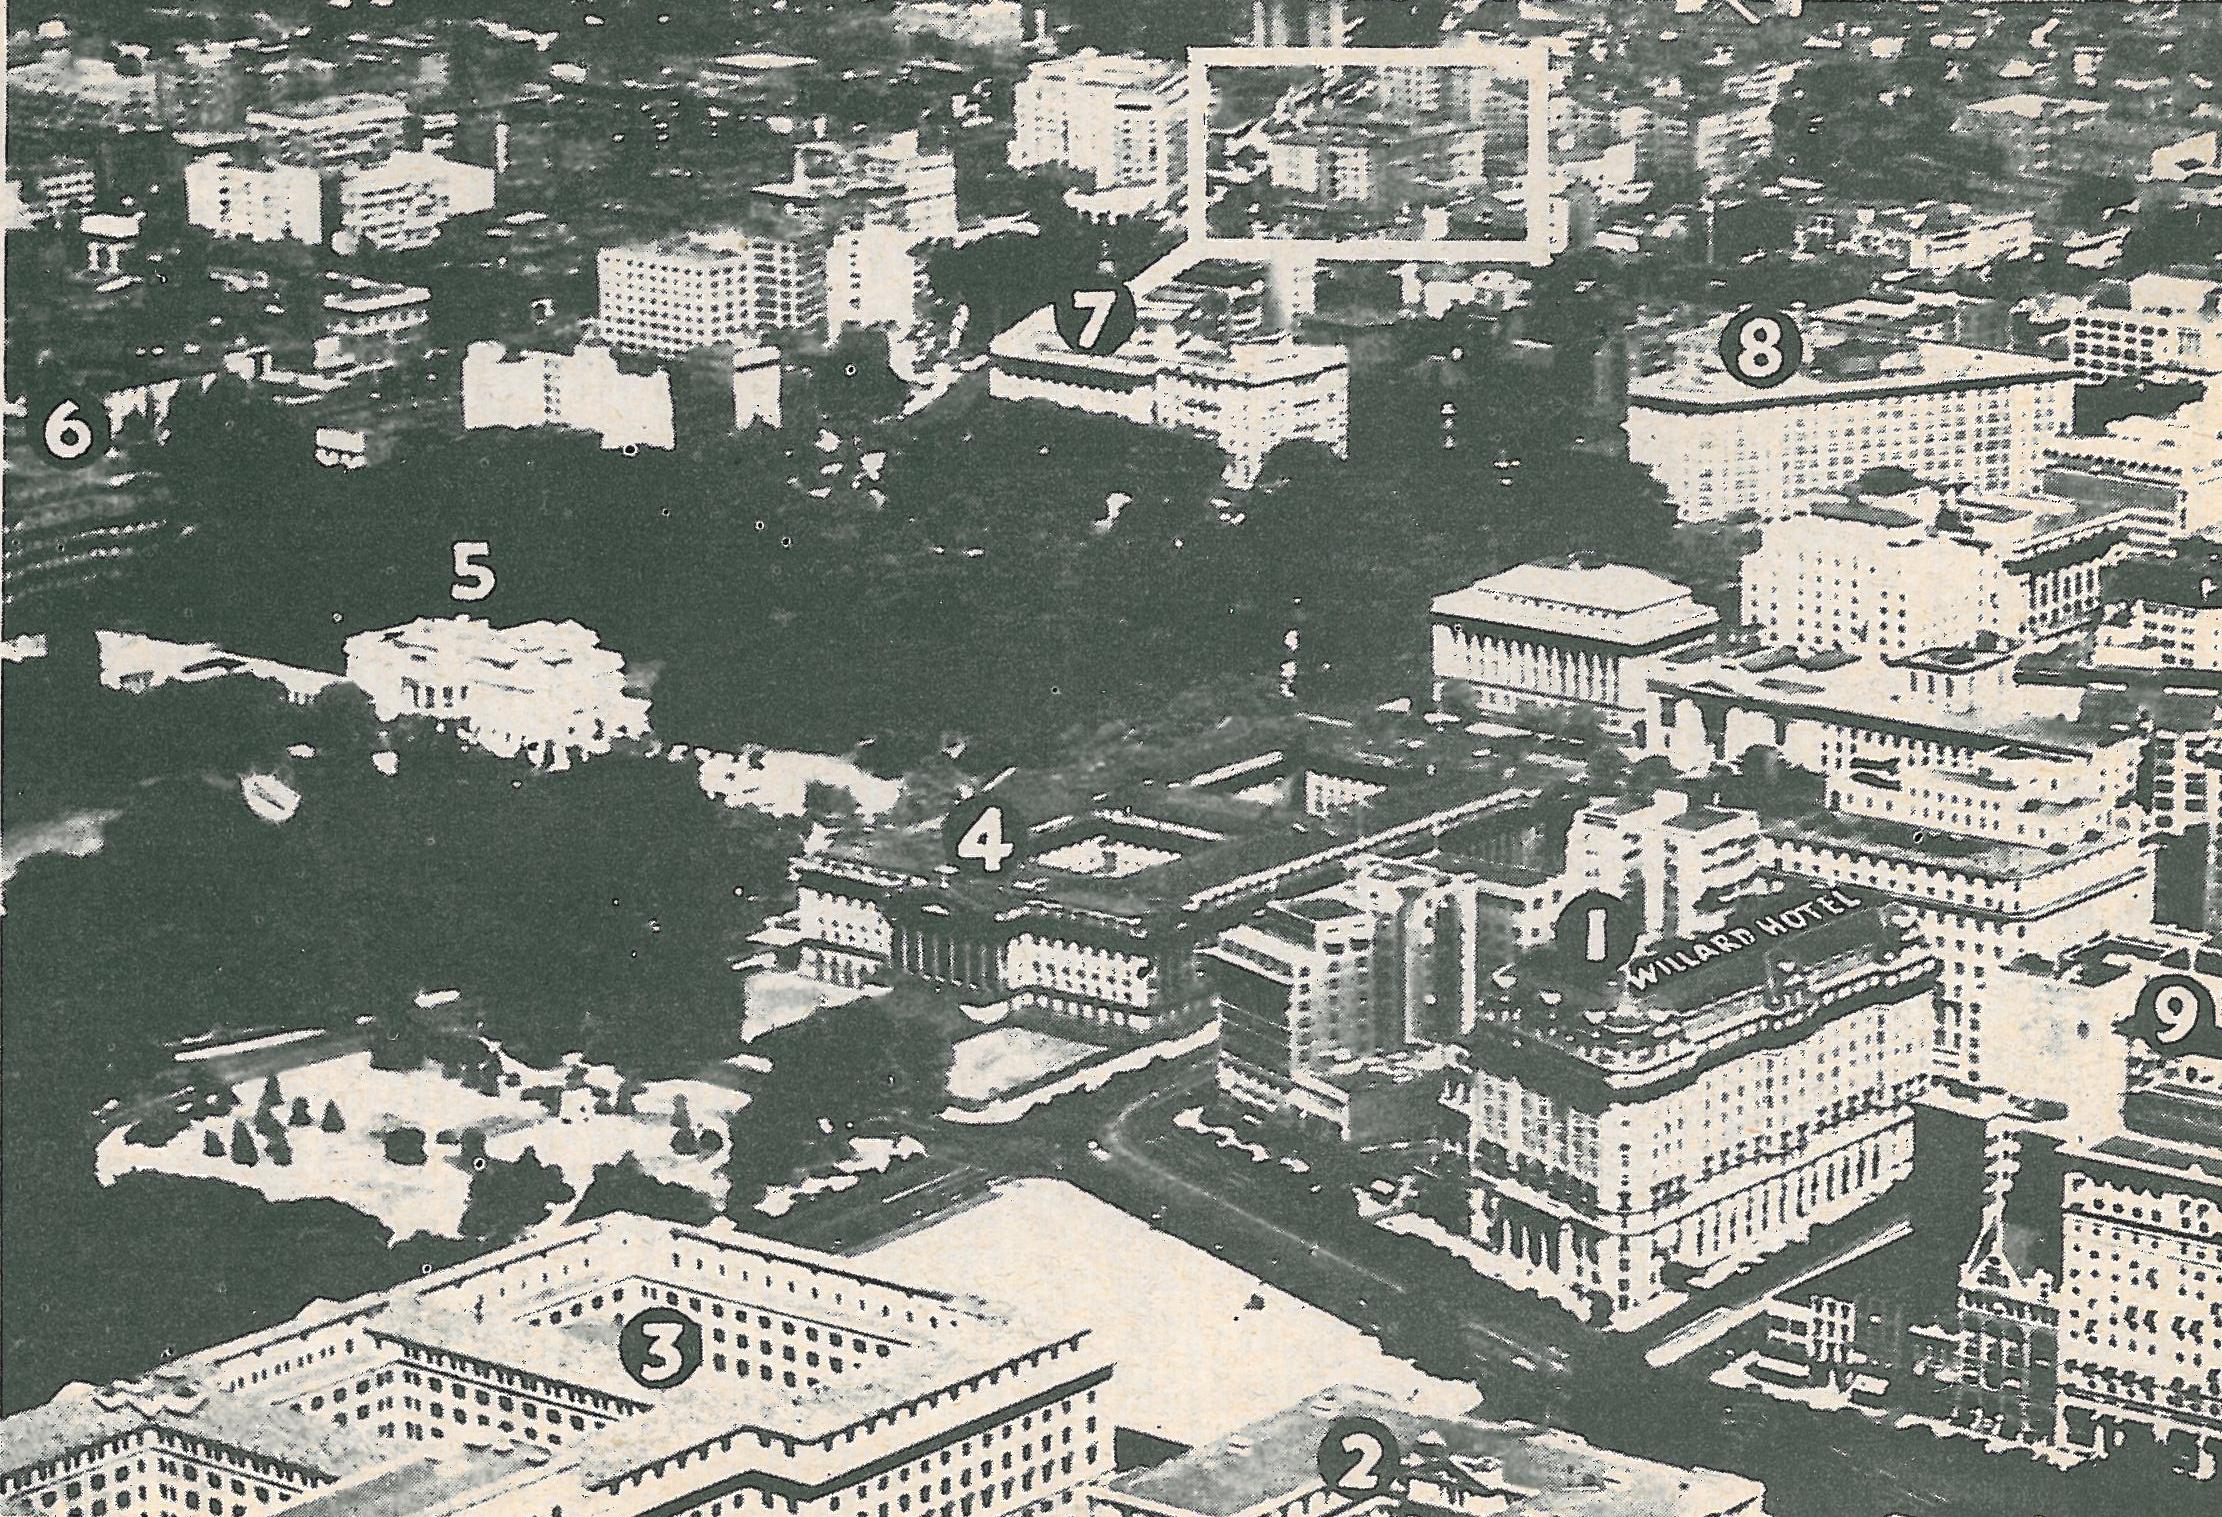 AMA HQ location in Stoneleigh Court, Washington DC, August 1946 (Source Model Aviation magazine, Lee Renaud Memorial Library collection)